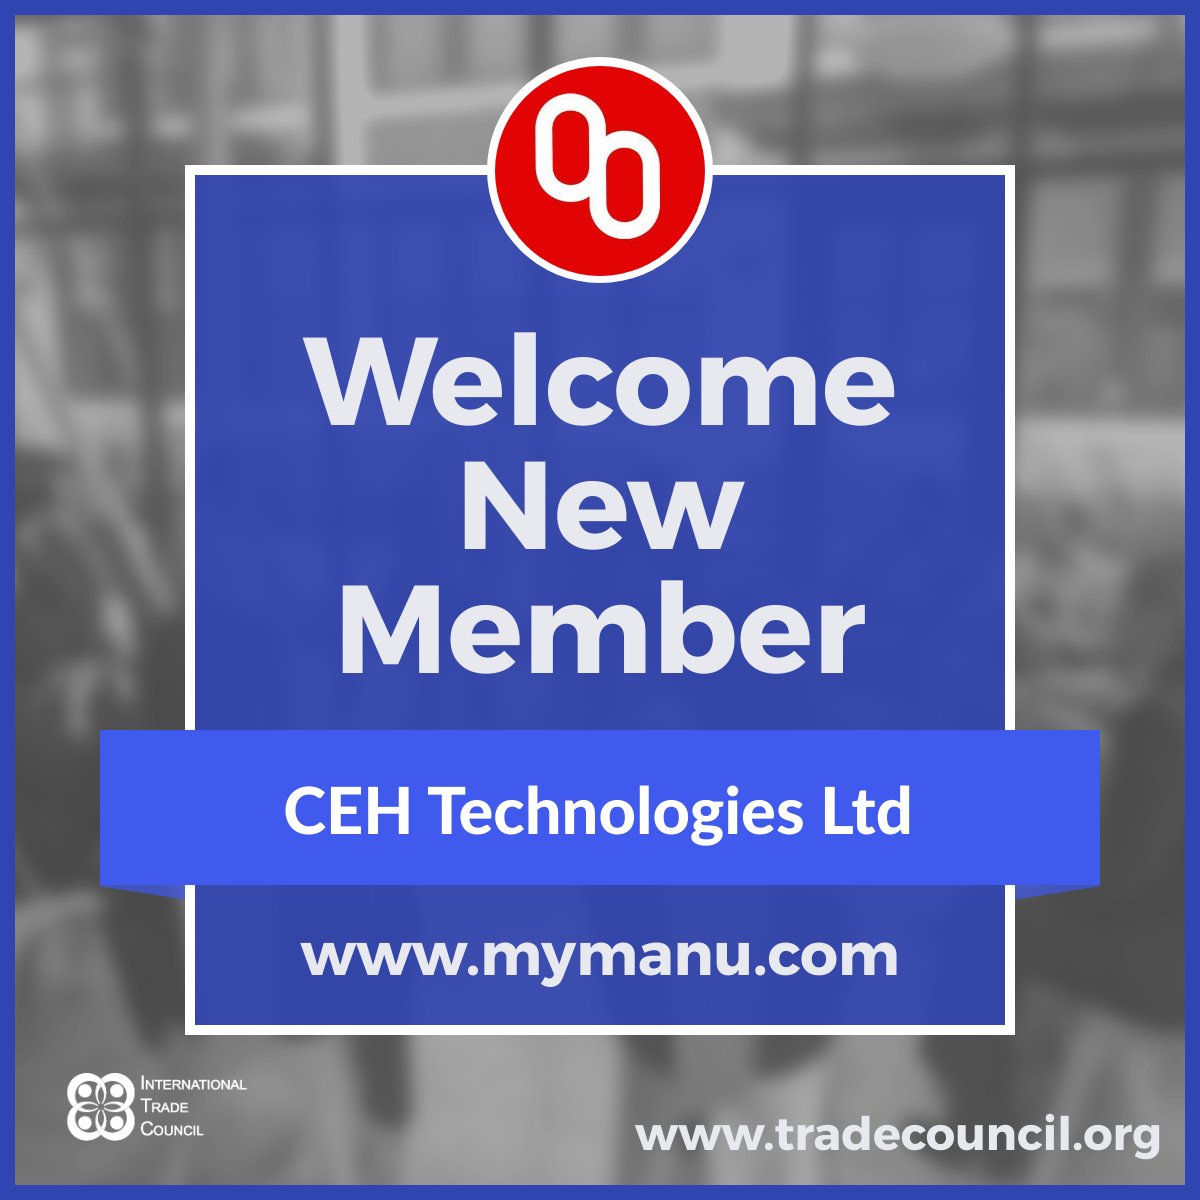 Welcome, @mymanuofficial to the International Trade Council. @mymanuofficial is an innovative manufacturer and designer of smart consumer electronics that enrich people's experience through the power of sound.